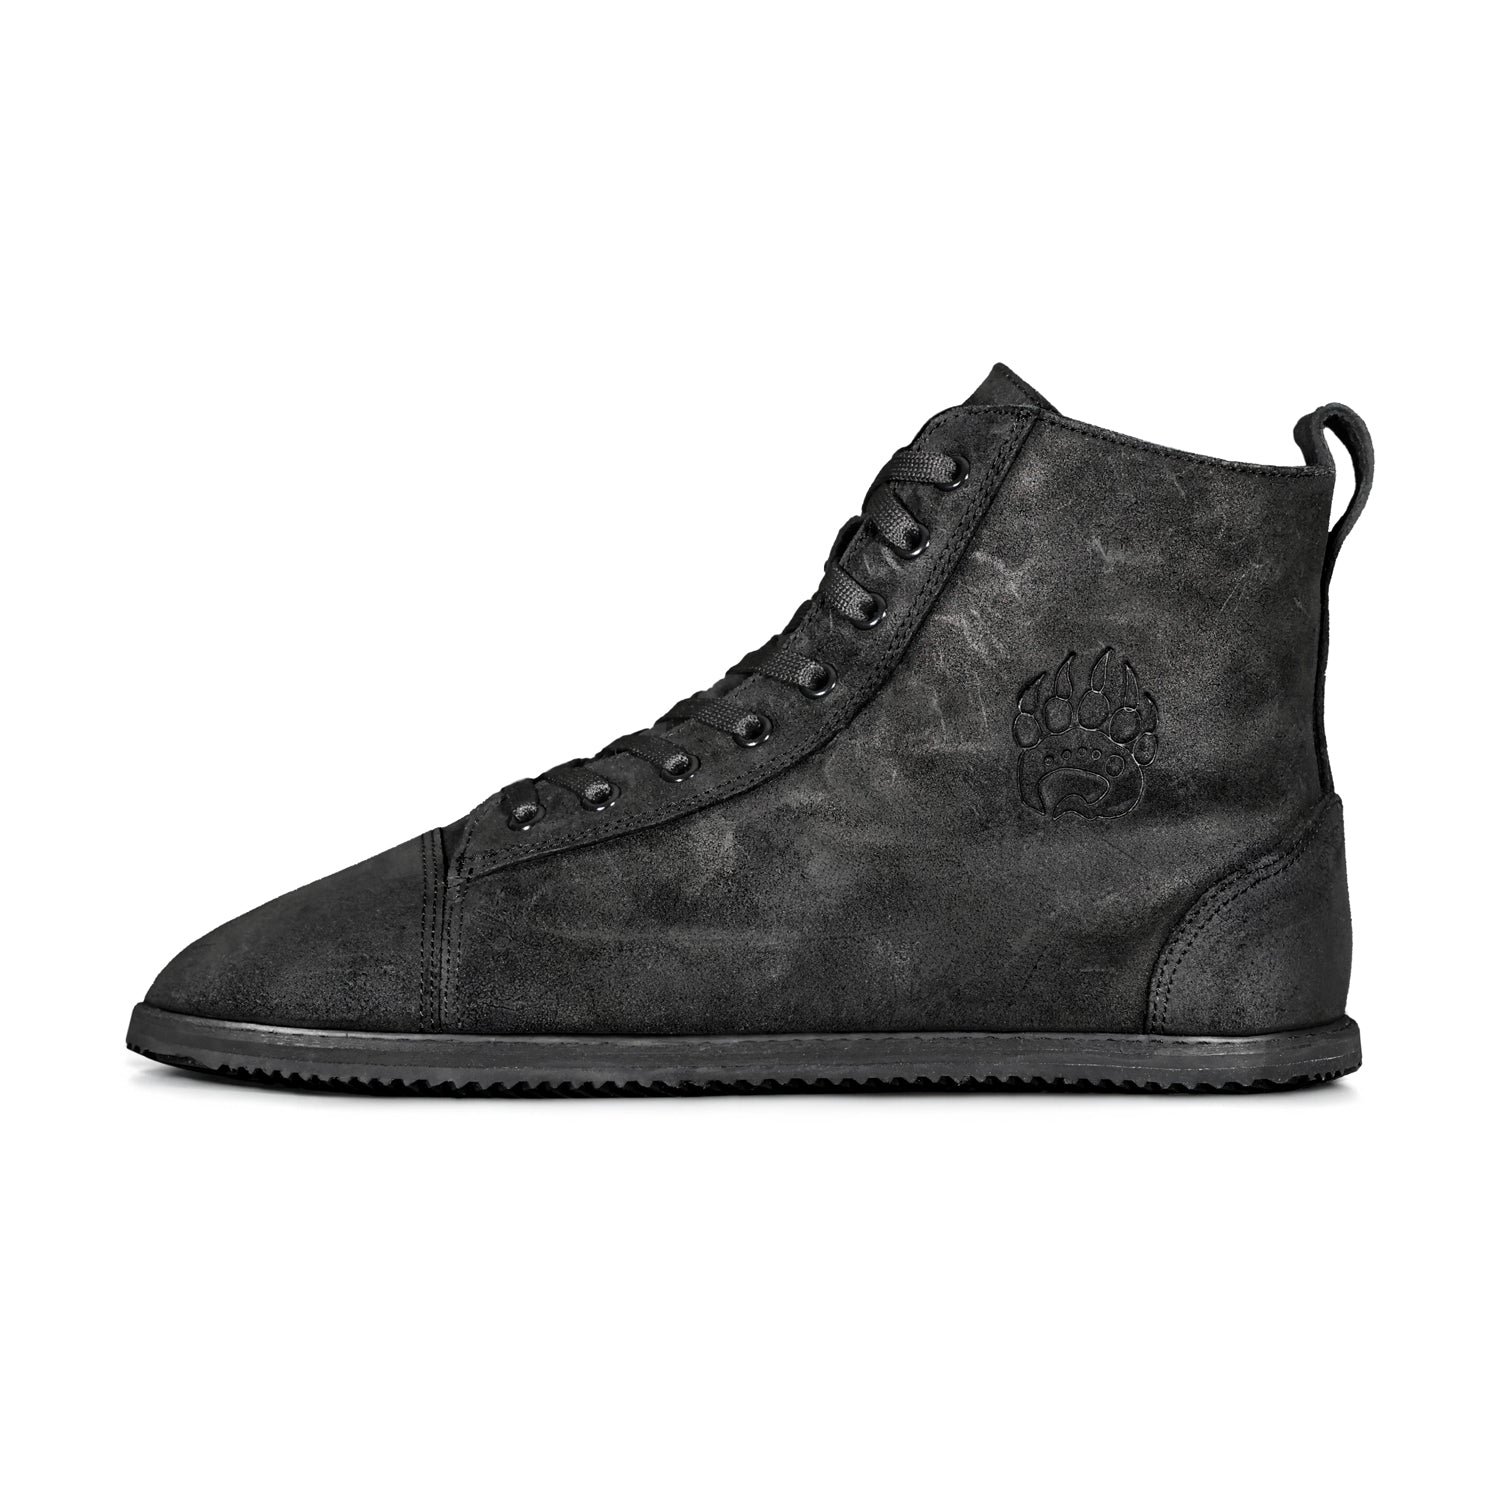 A single black high-top boot with a lace-up design and embossed logo on the side. The Ursidae shoe by Bearfoot features a sleek, all-black rubber sole and is made of durable suede leather.